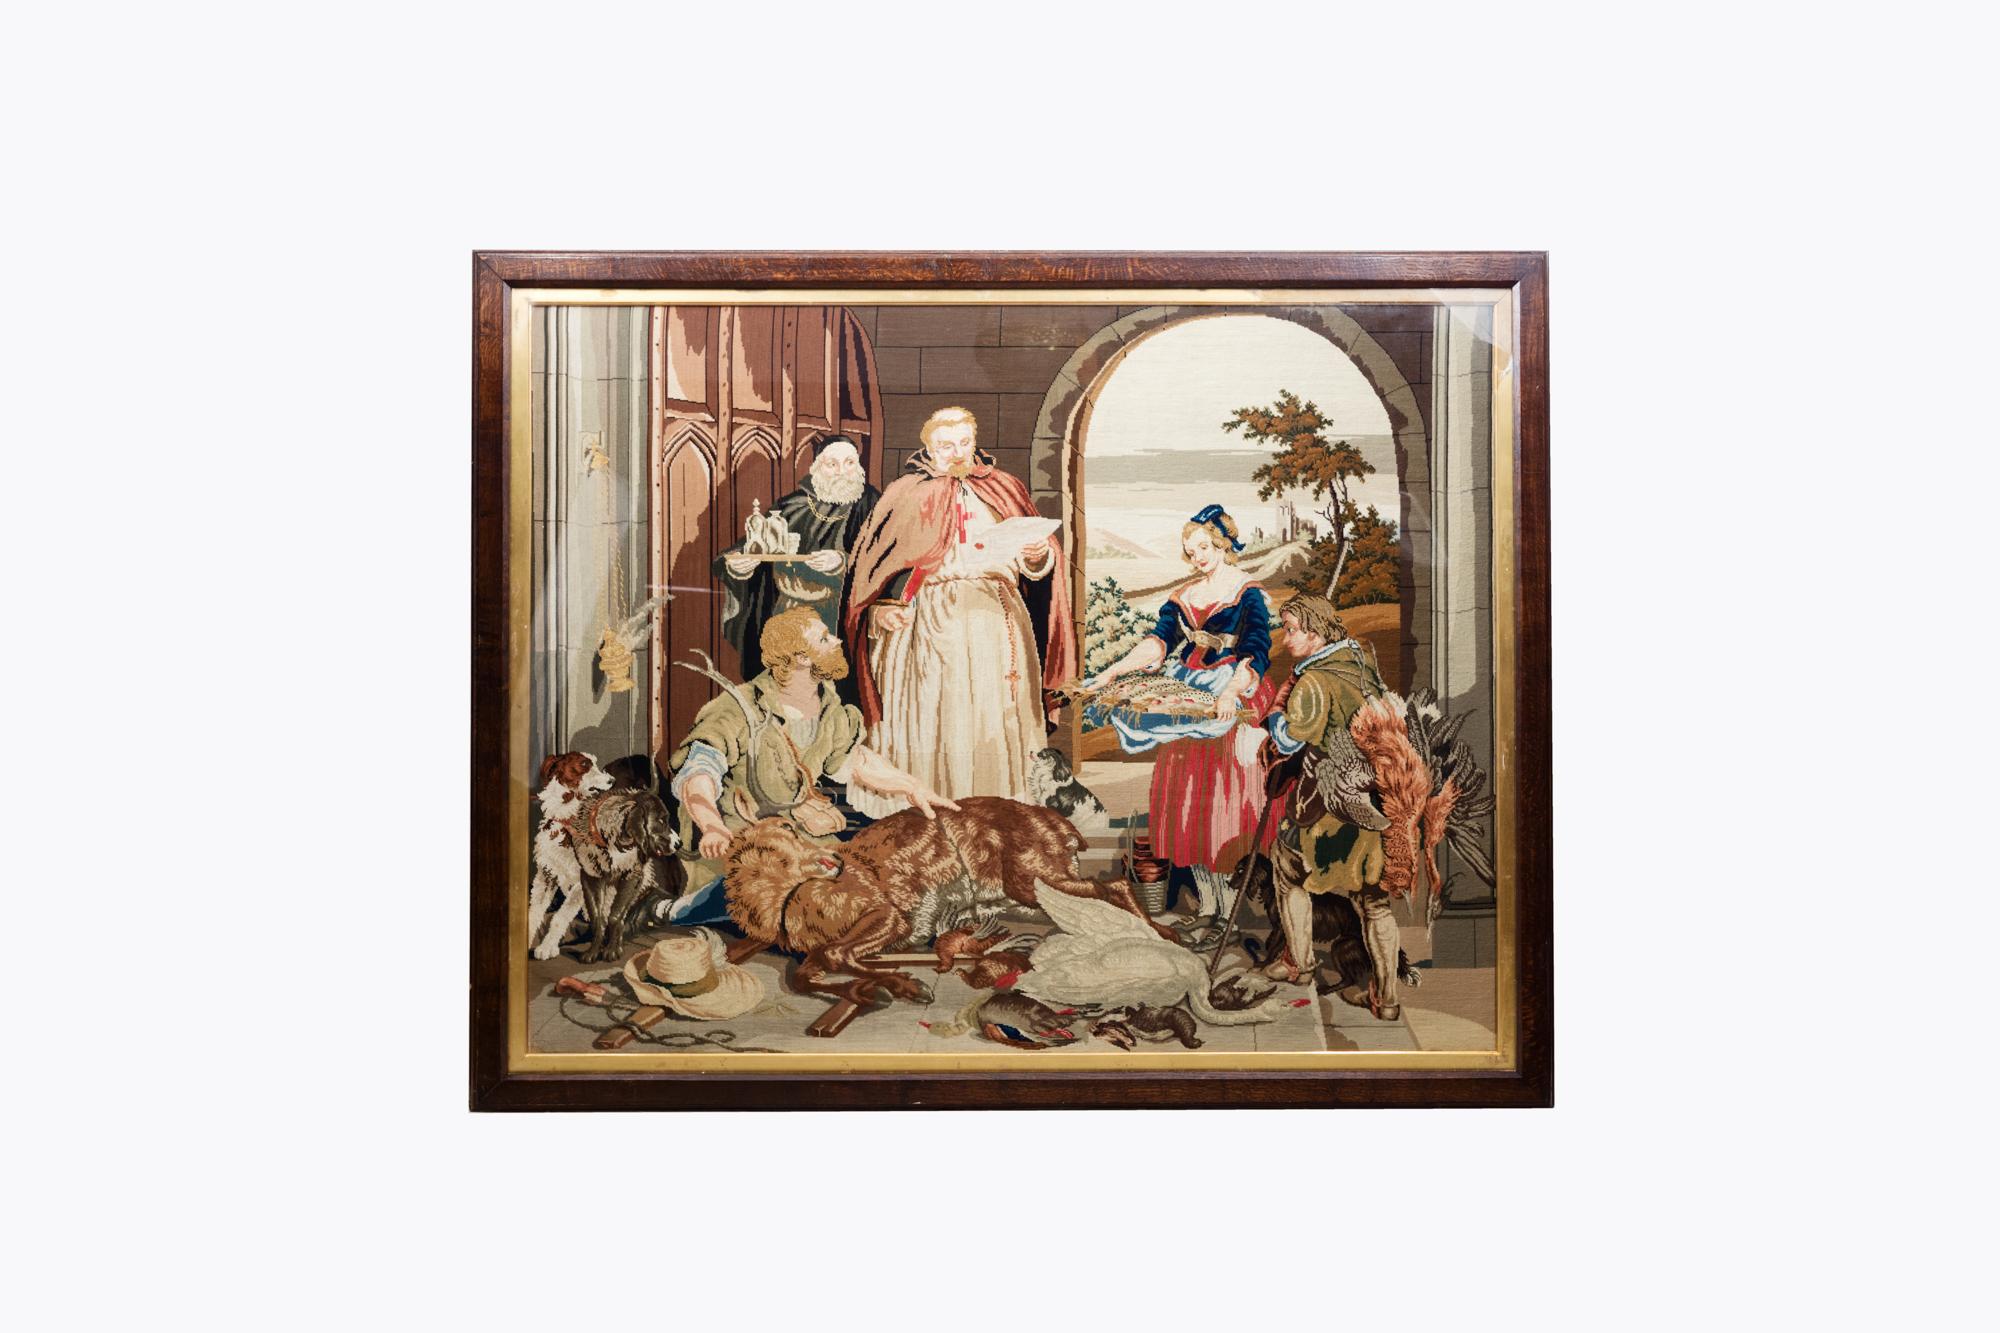 Late 19th Century framed needlework tapestry scene based on the painting ‘Bolton Abbey in the Olden Time’ by Sir Edwin Landseer, the original of which hangs in Chatsworth House, Devon. The tapestry is housed in an original wooden frame with gilt